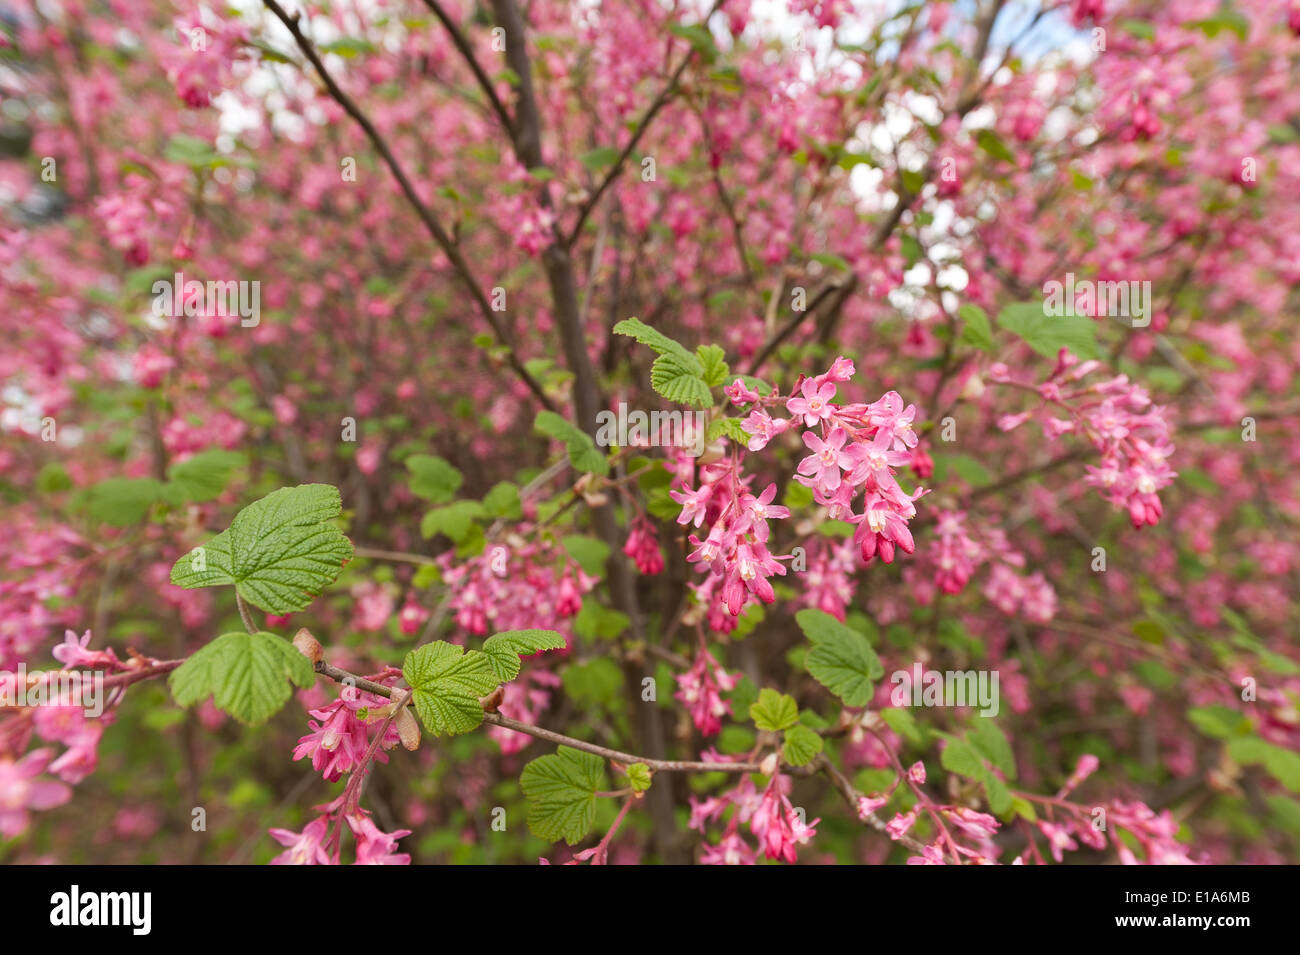 Delicate soft flowers of red pink currant shrub redflower bush lots of bright vibrant blossom Stock Photo